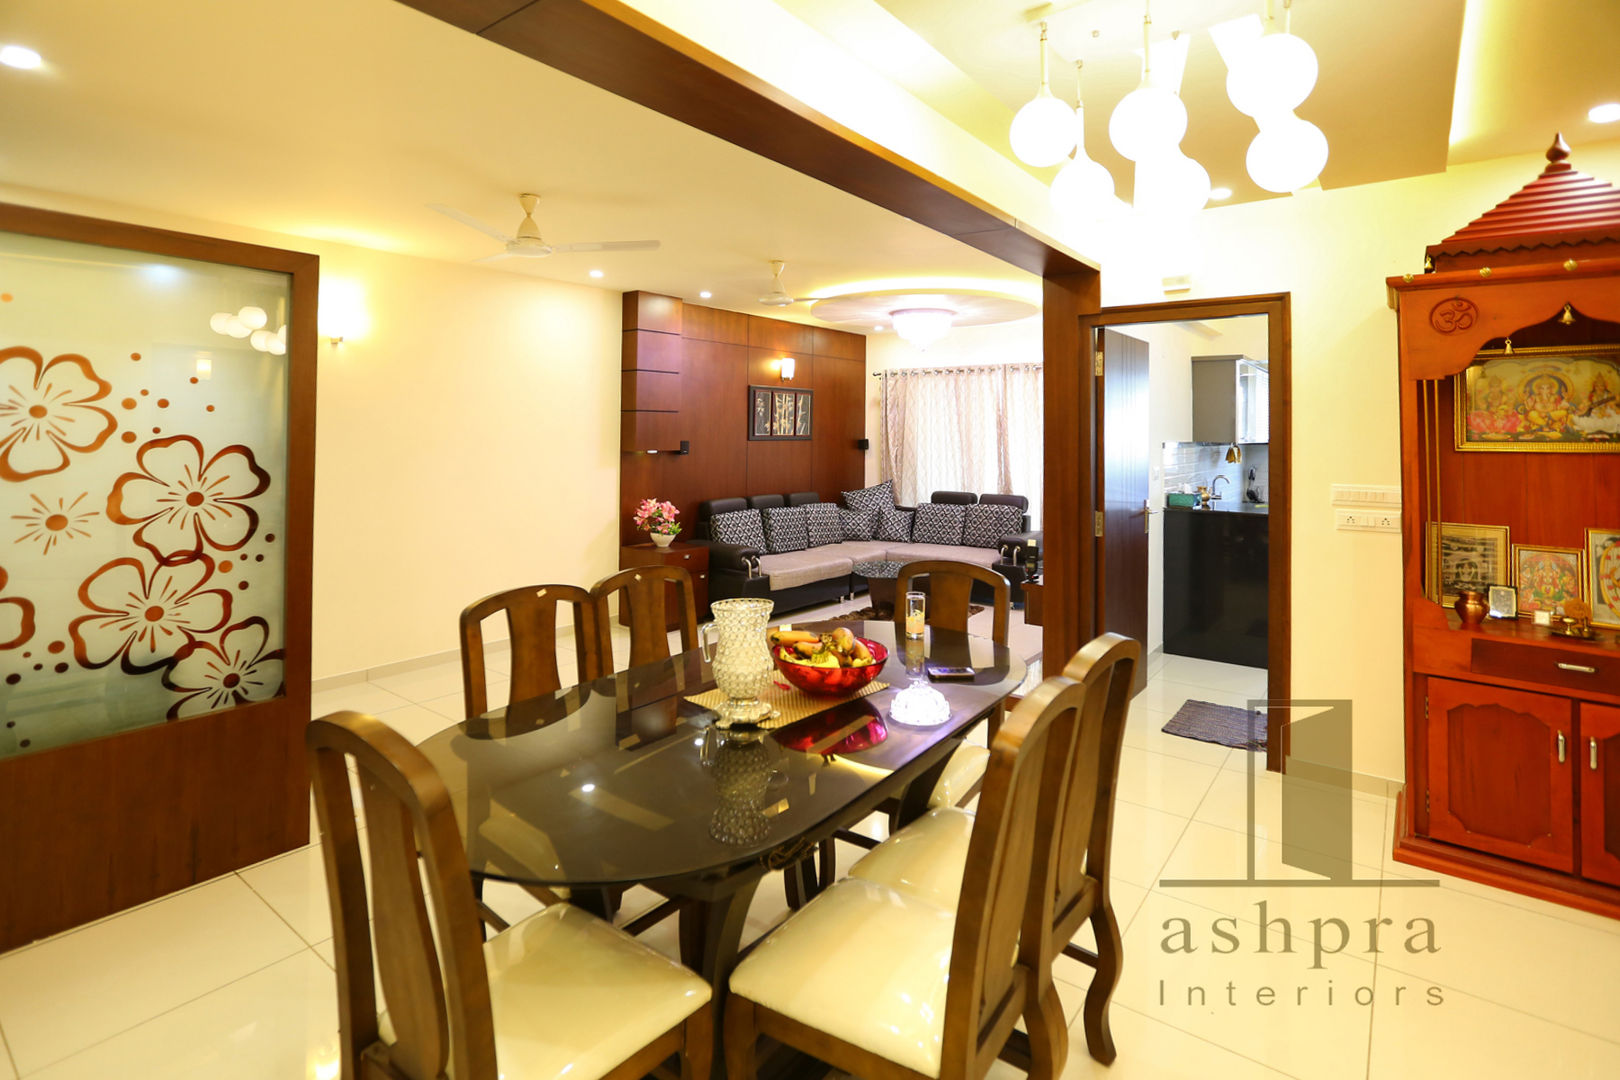 Interior work for a 2 bedroom apartment @ Mangalore.., Ashpra interiors Ashpra interiors Ruang Olahraga Gaya Asia Tables